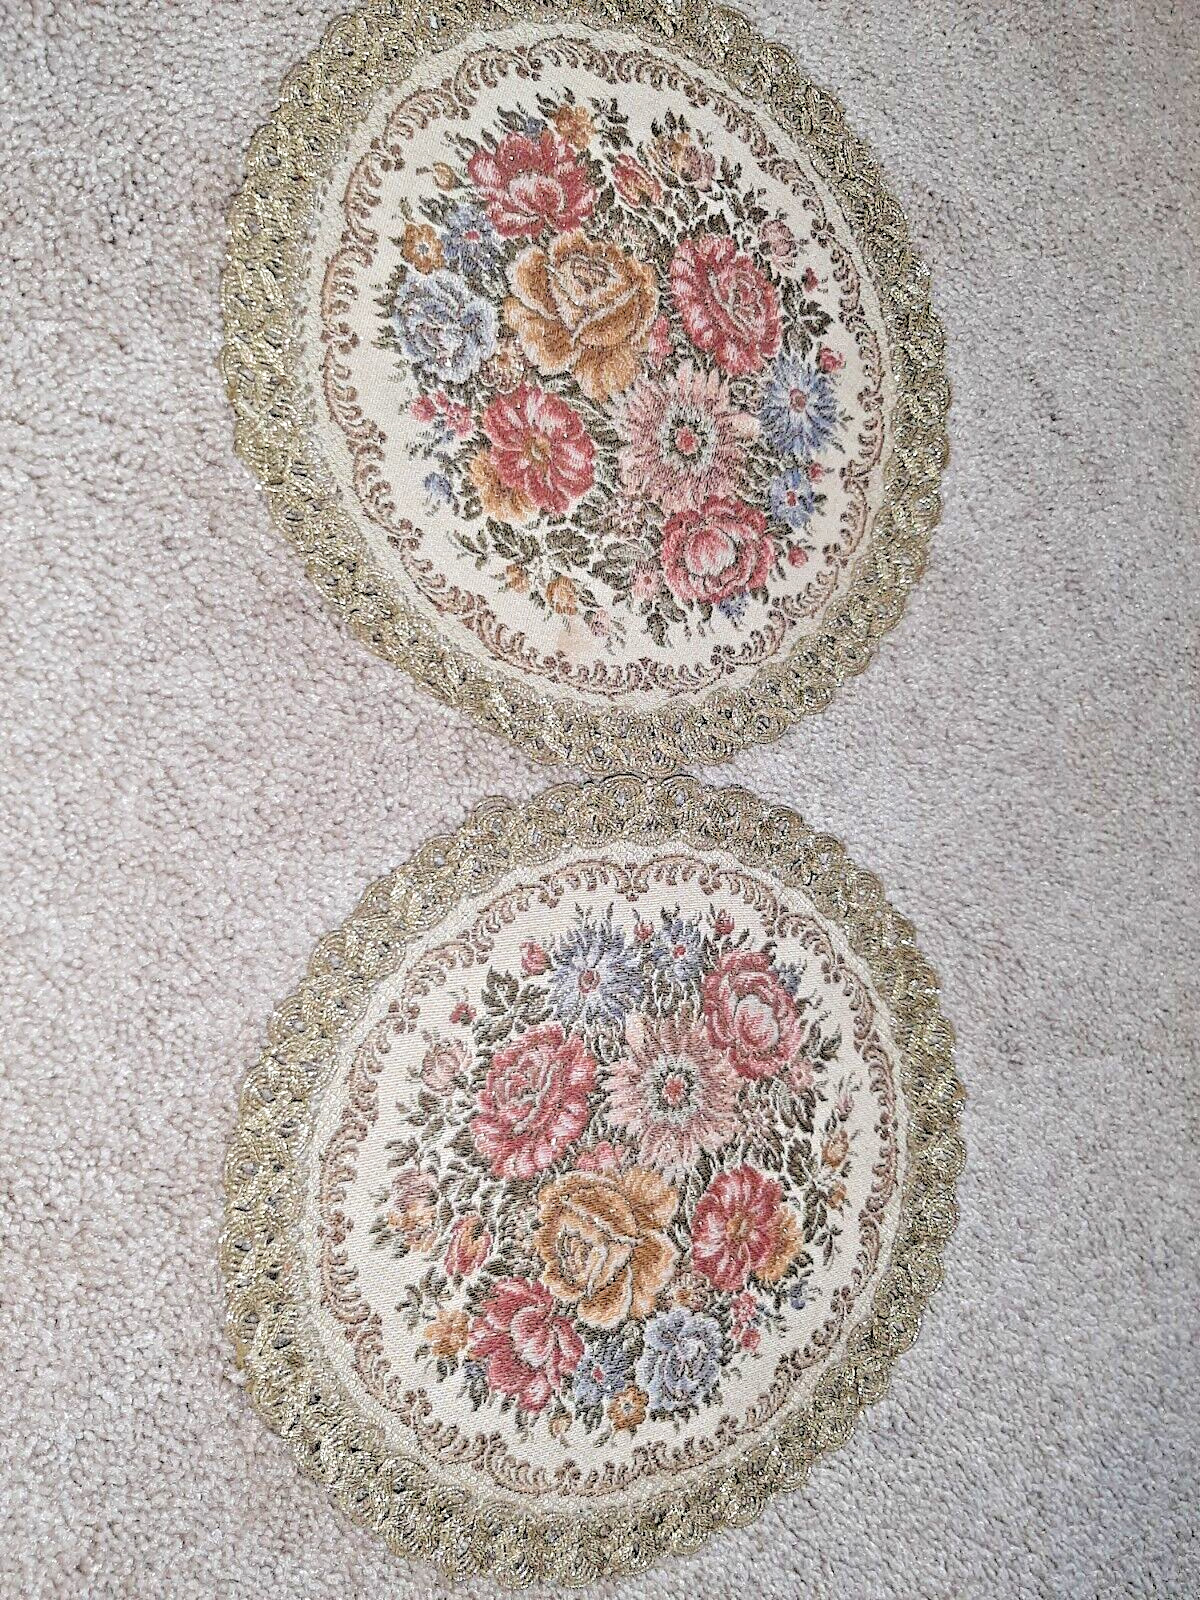 A Pair Of Vintage German Embroidered Table Mats